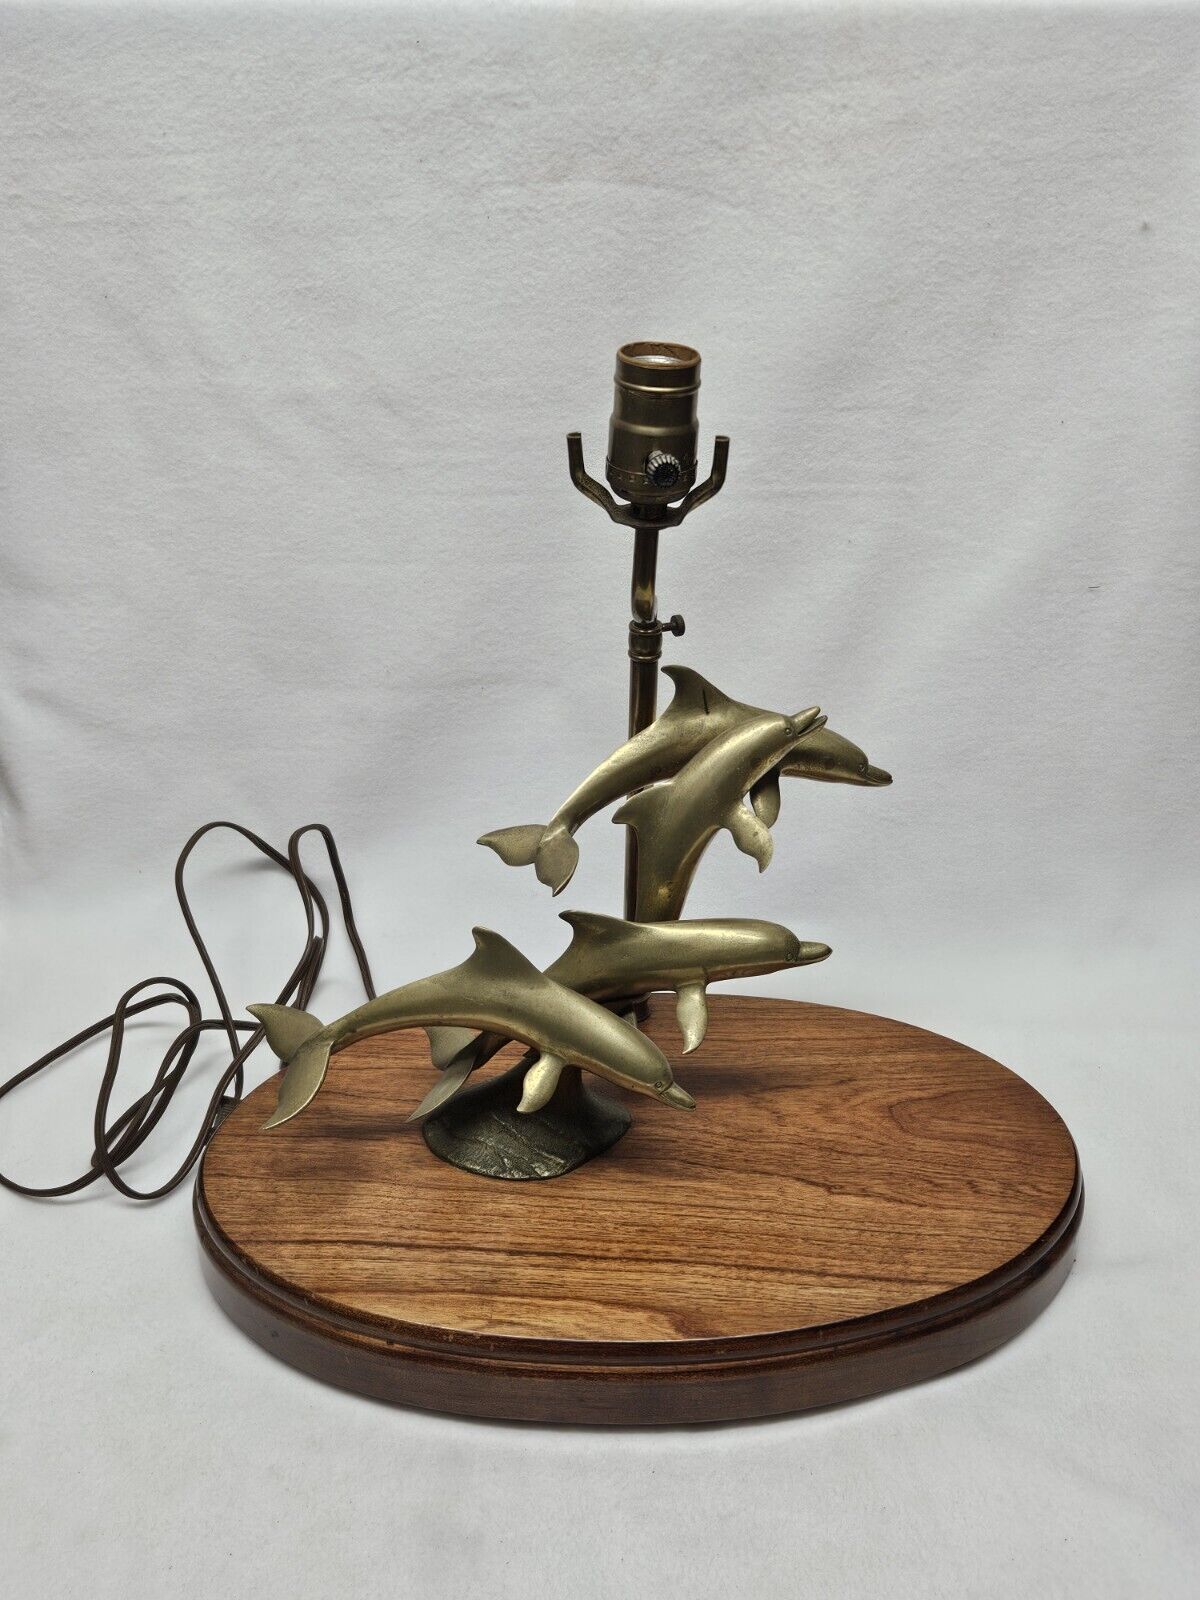 Vintage McDonald Sportlamps Essex Ct No.284 Handmade Brass Lamp With Dolphins